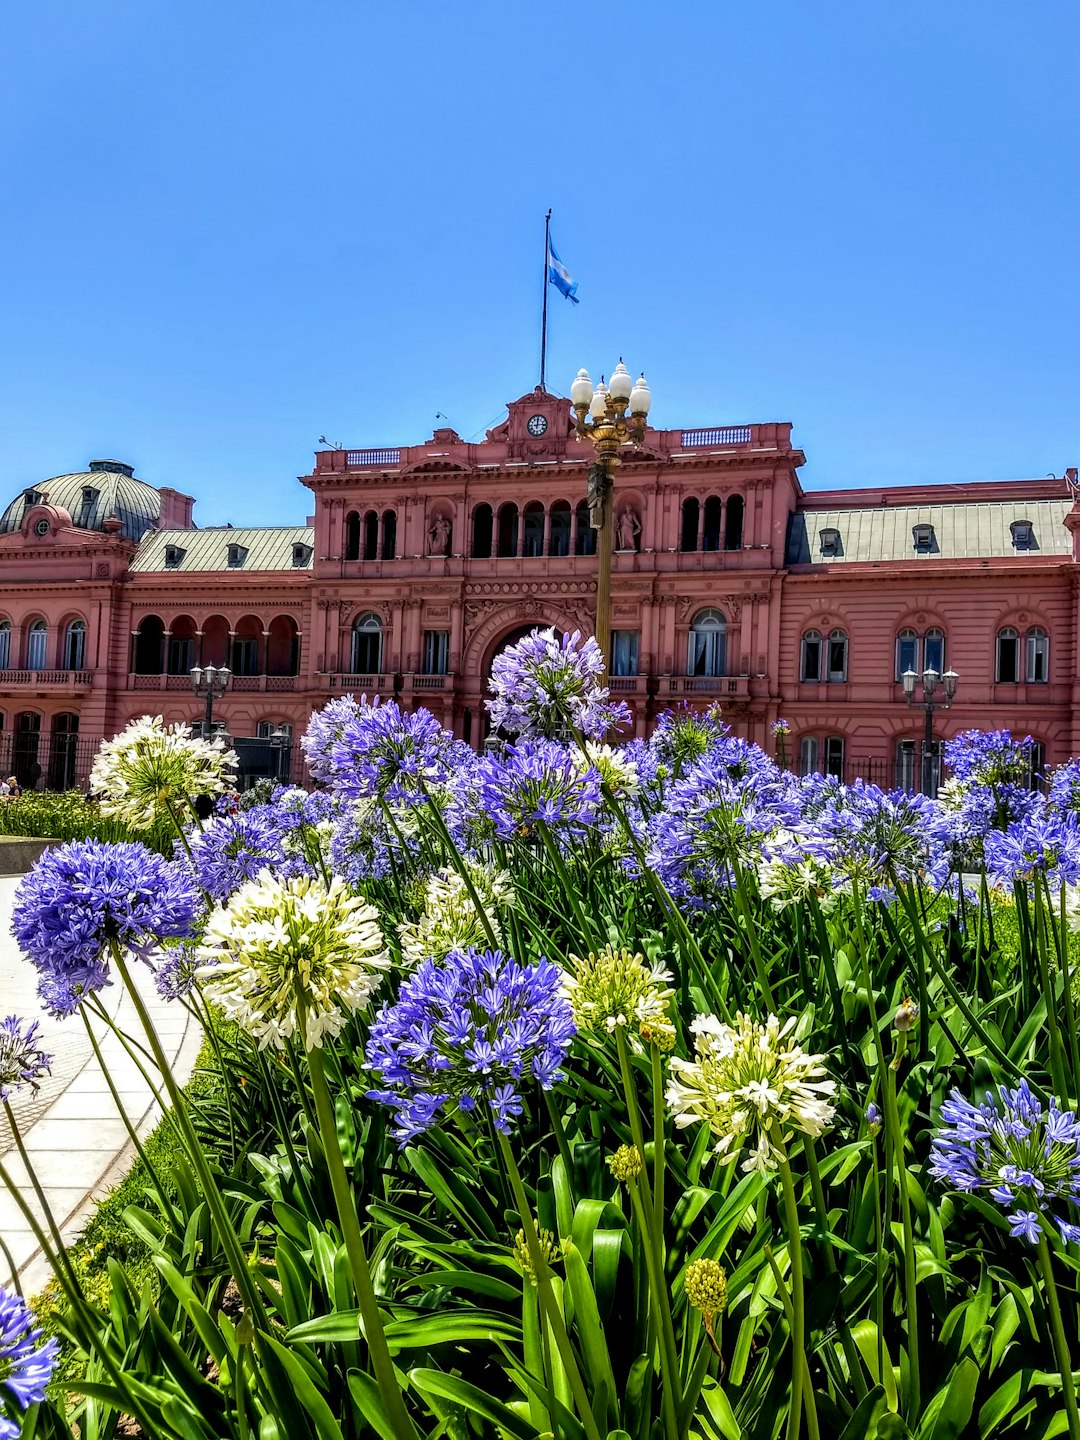 Travel Tips and Stories of Plaza de Mayo in Argentina